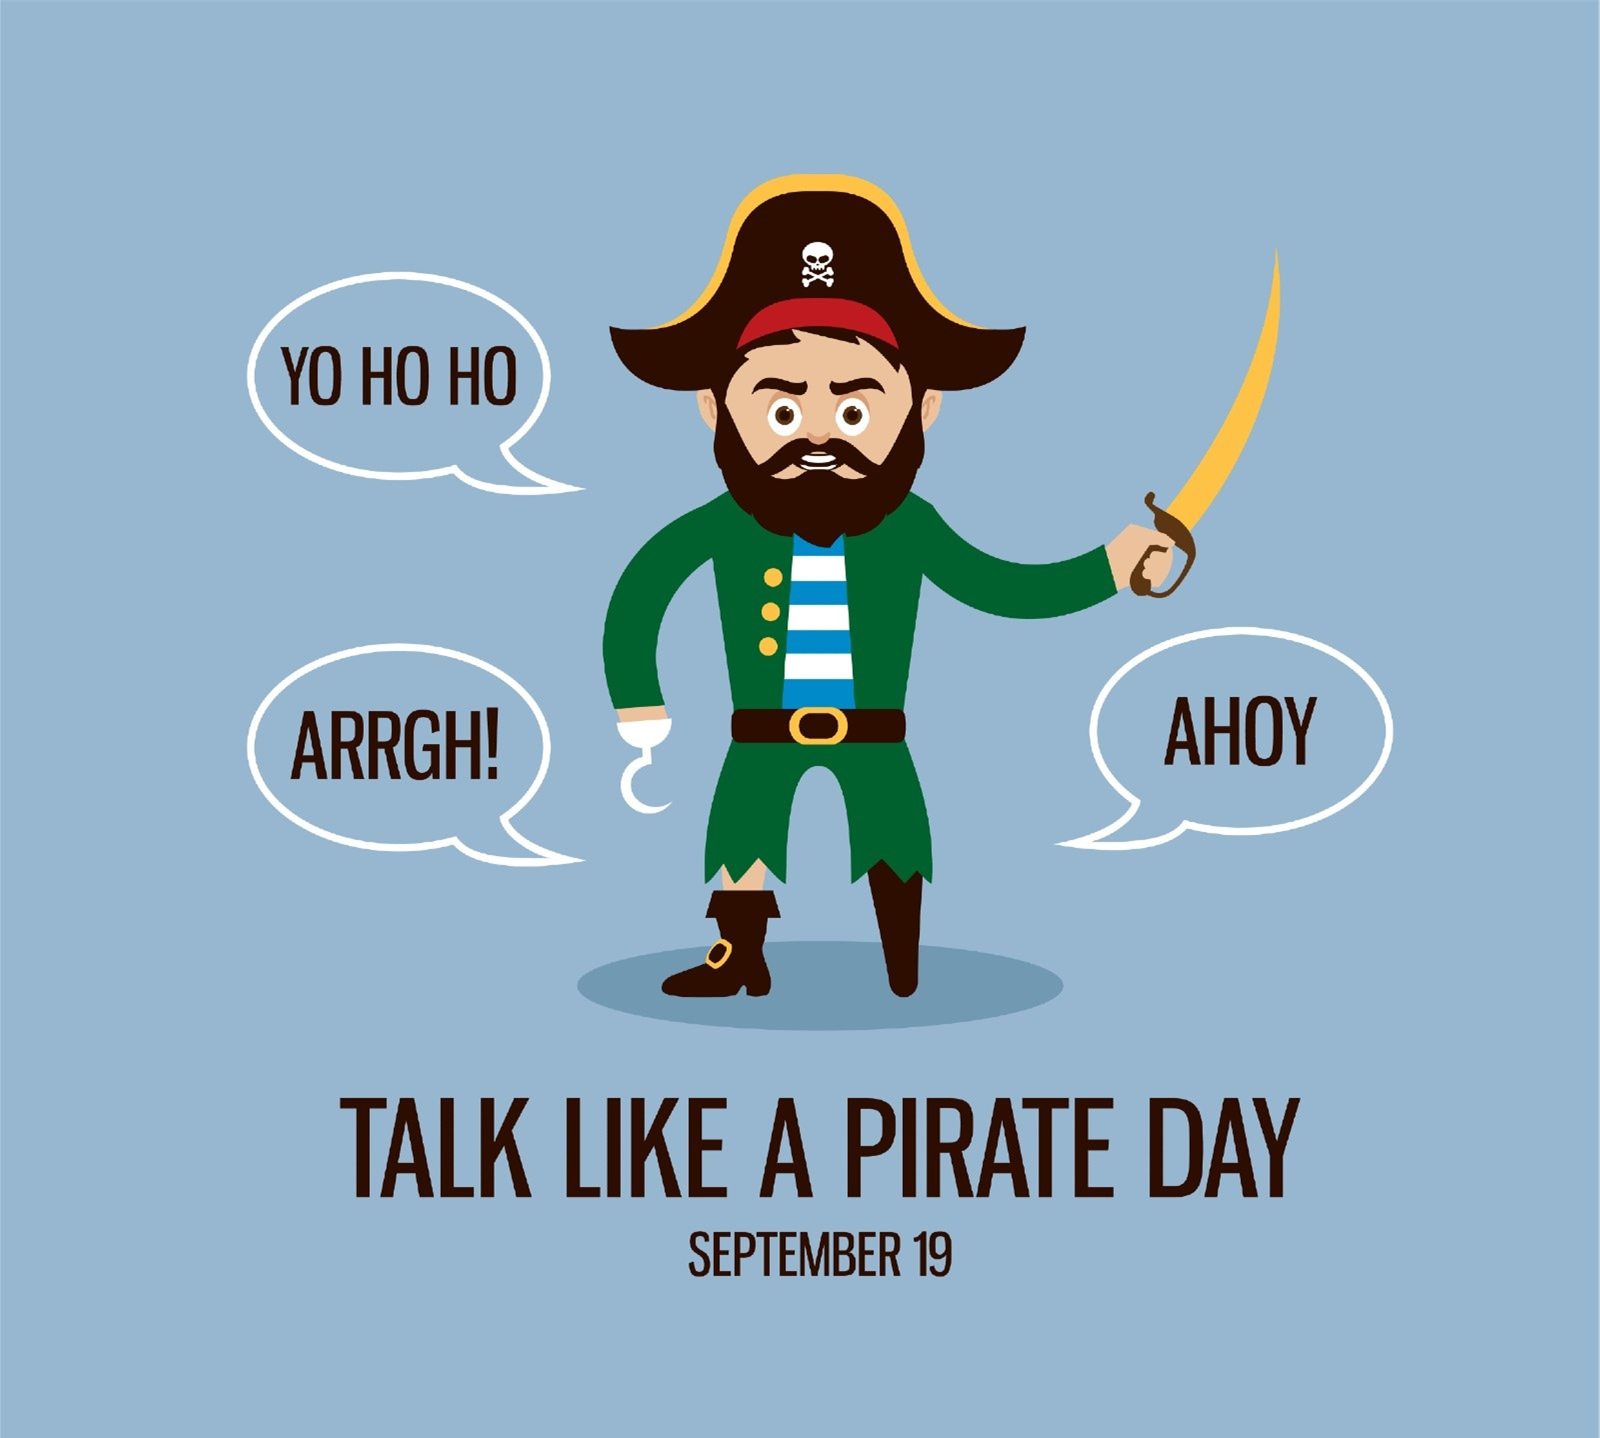 September 19th is Talk Like a Pirate Day!